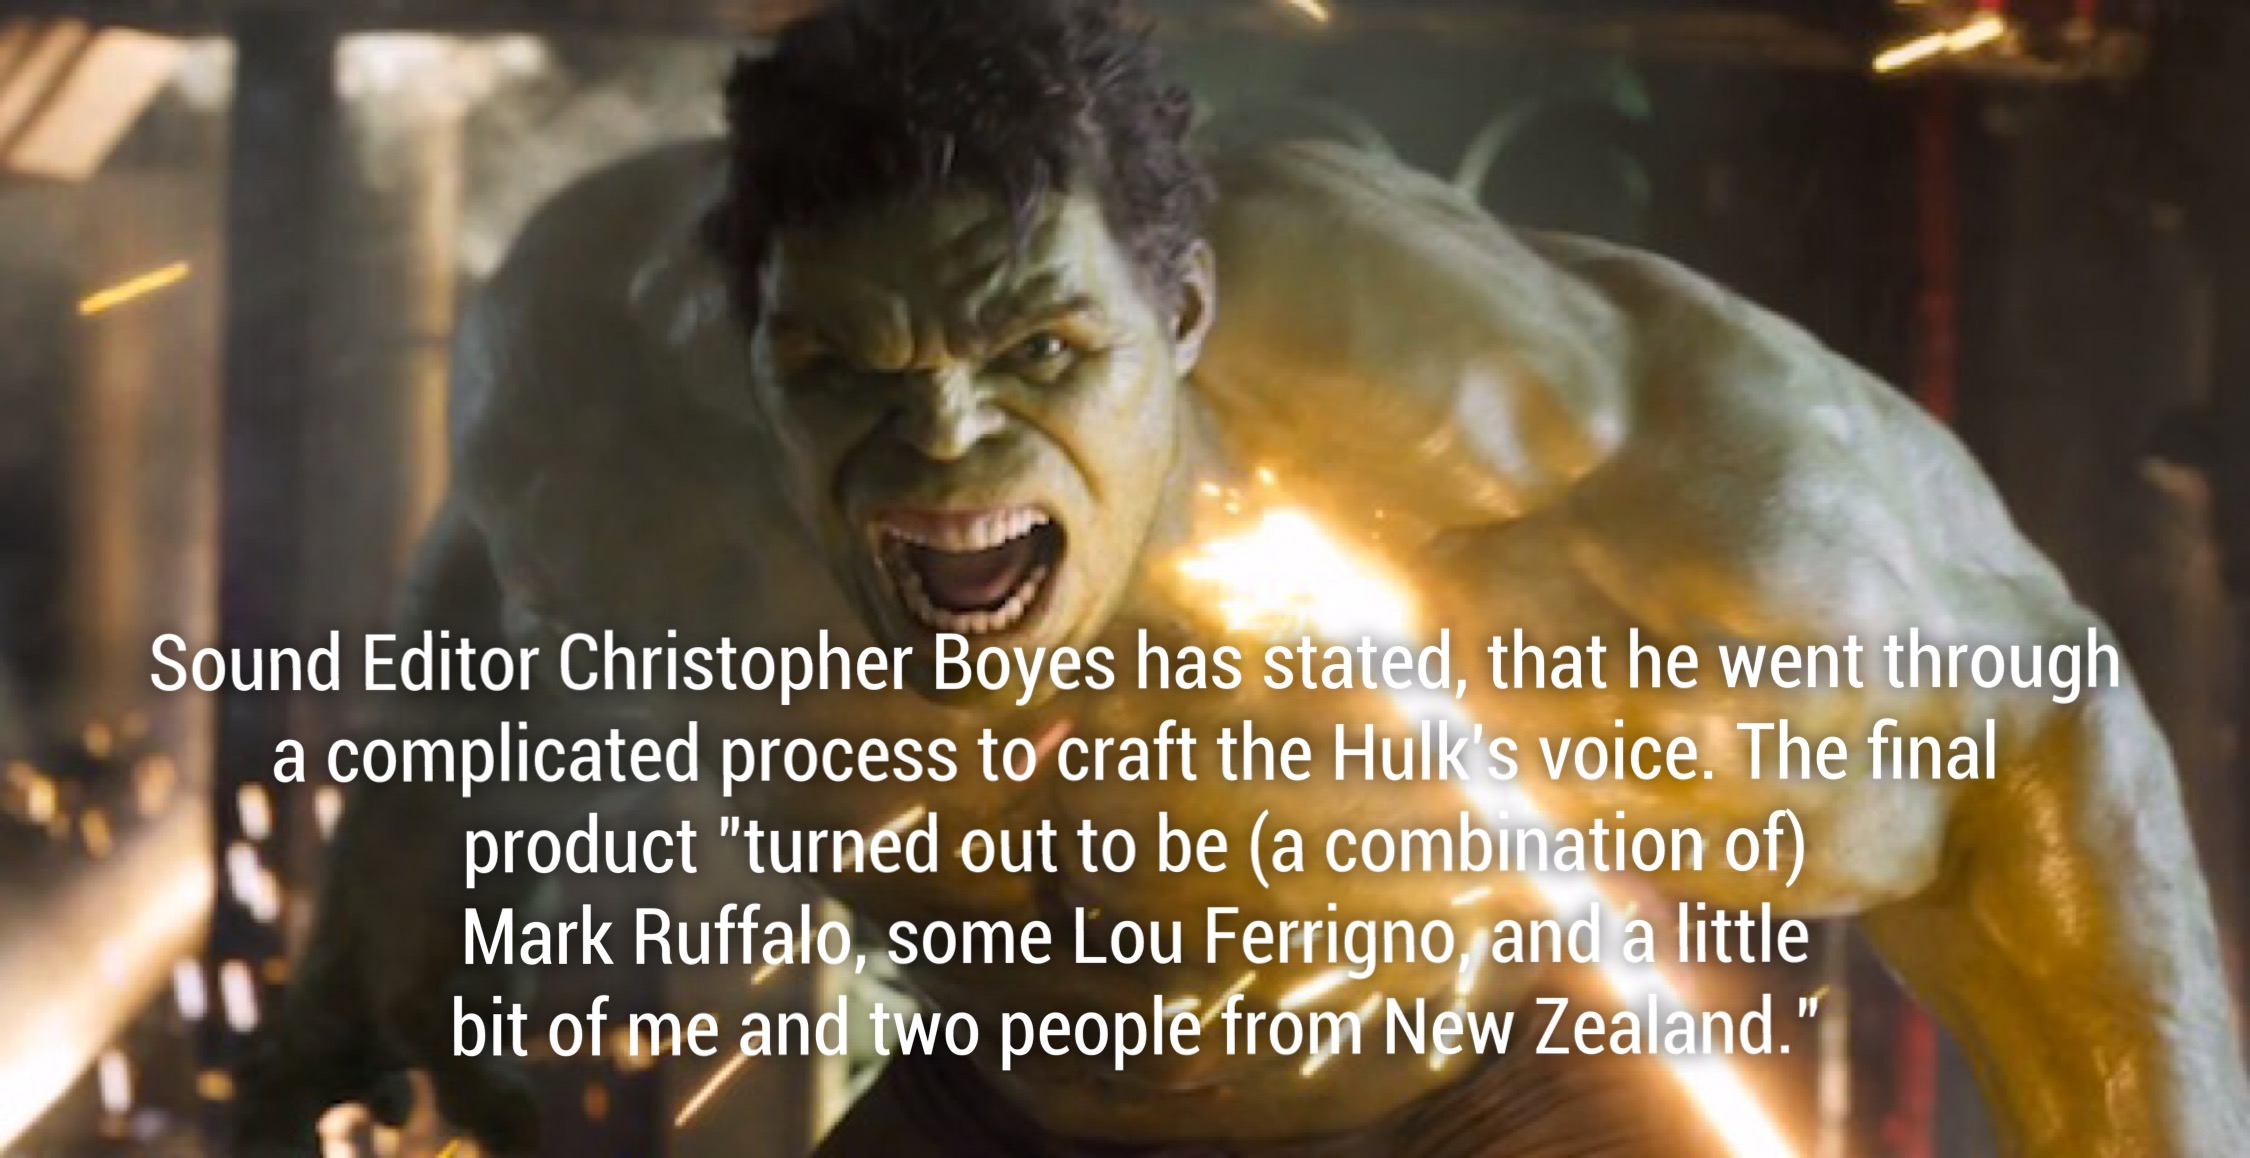 best movie special effects - Sound Editor Christopher Boyes has stated, that he went through a complicated process to craft the Hulk's voice. The final product "turned out to be a combination of Mark Ruffalo, some Lou Ferrigno, and a little bit of me and 